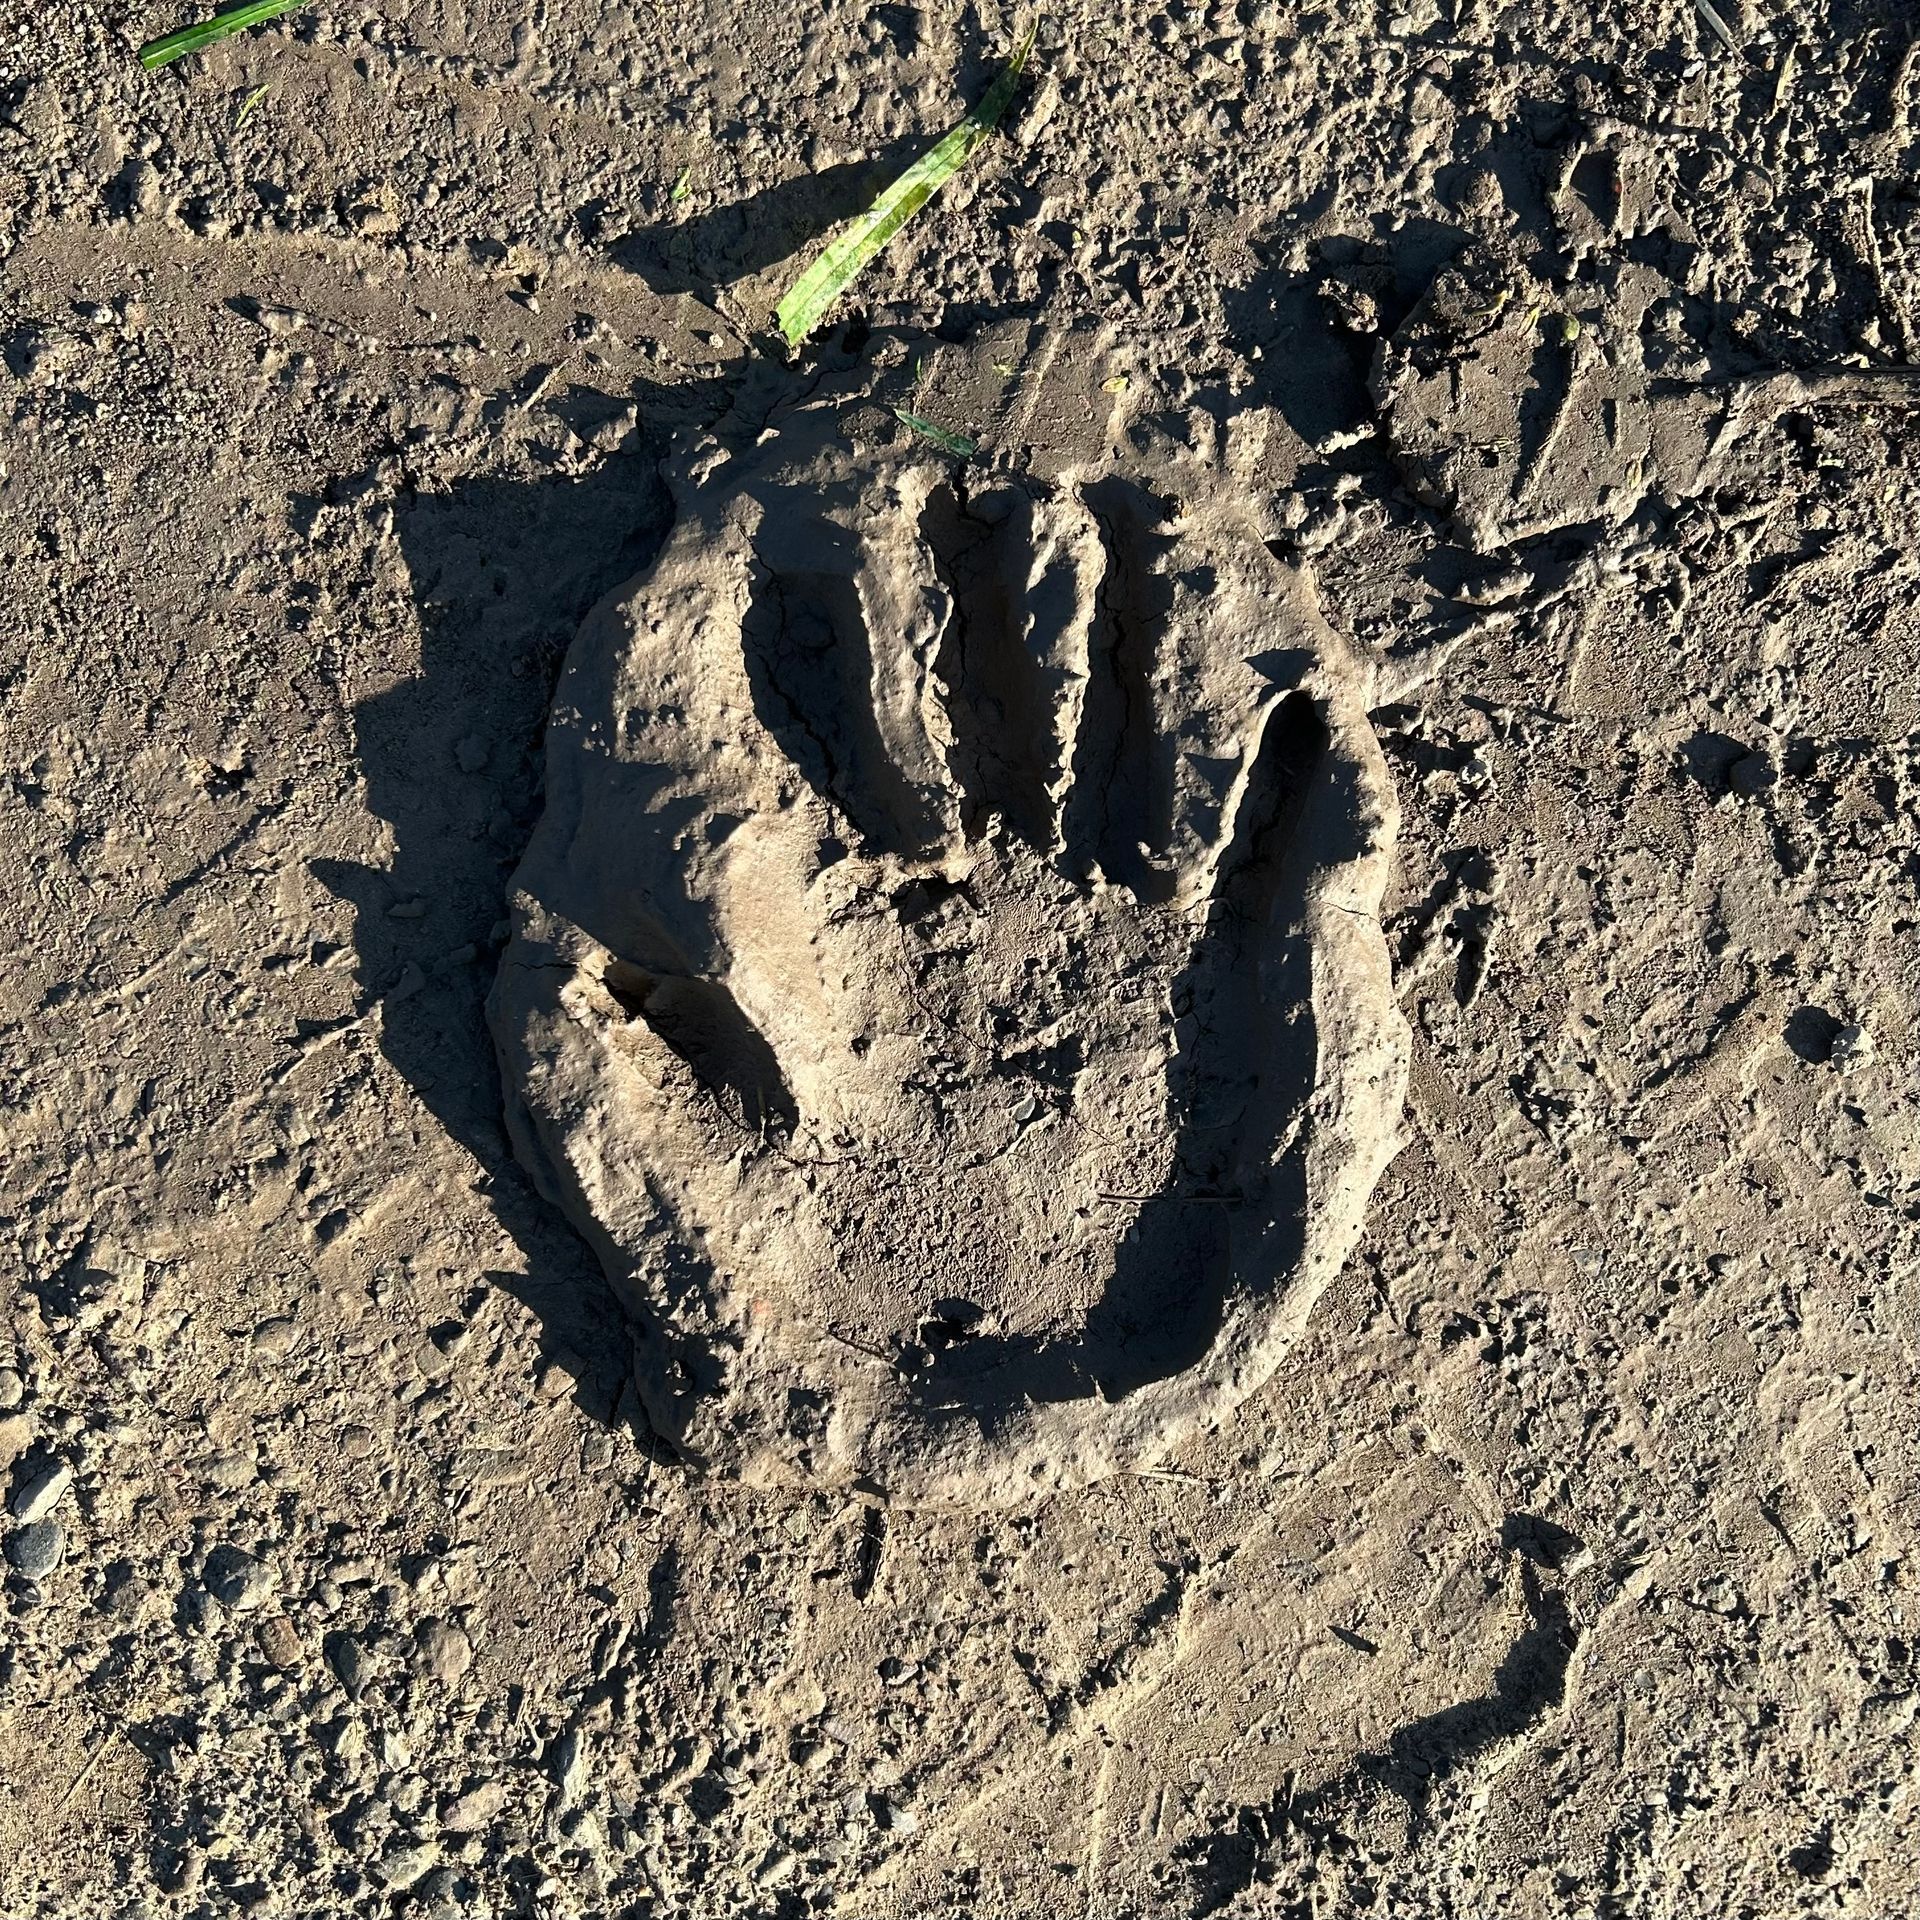 A hand in the mud at Ironwood Farm